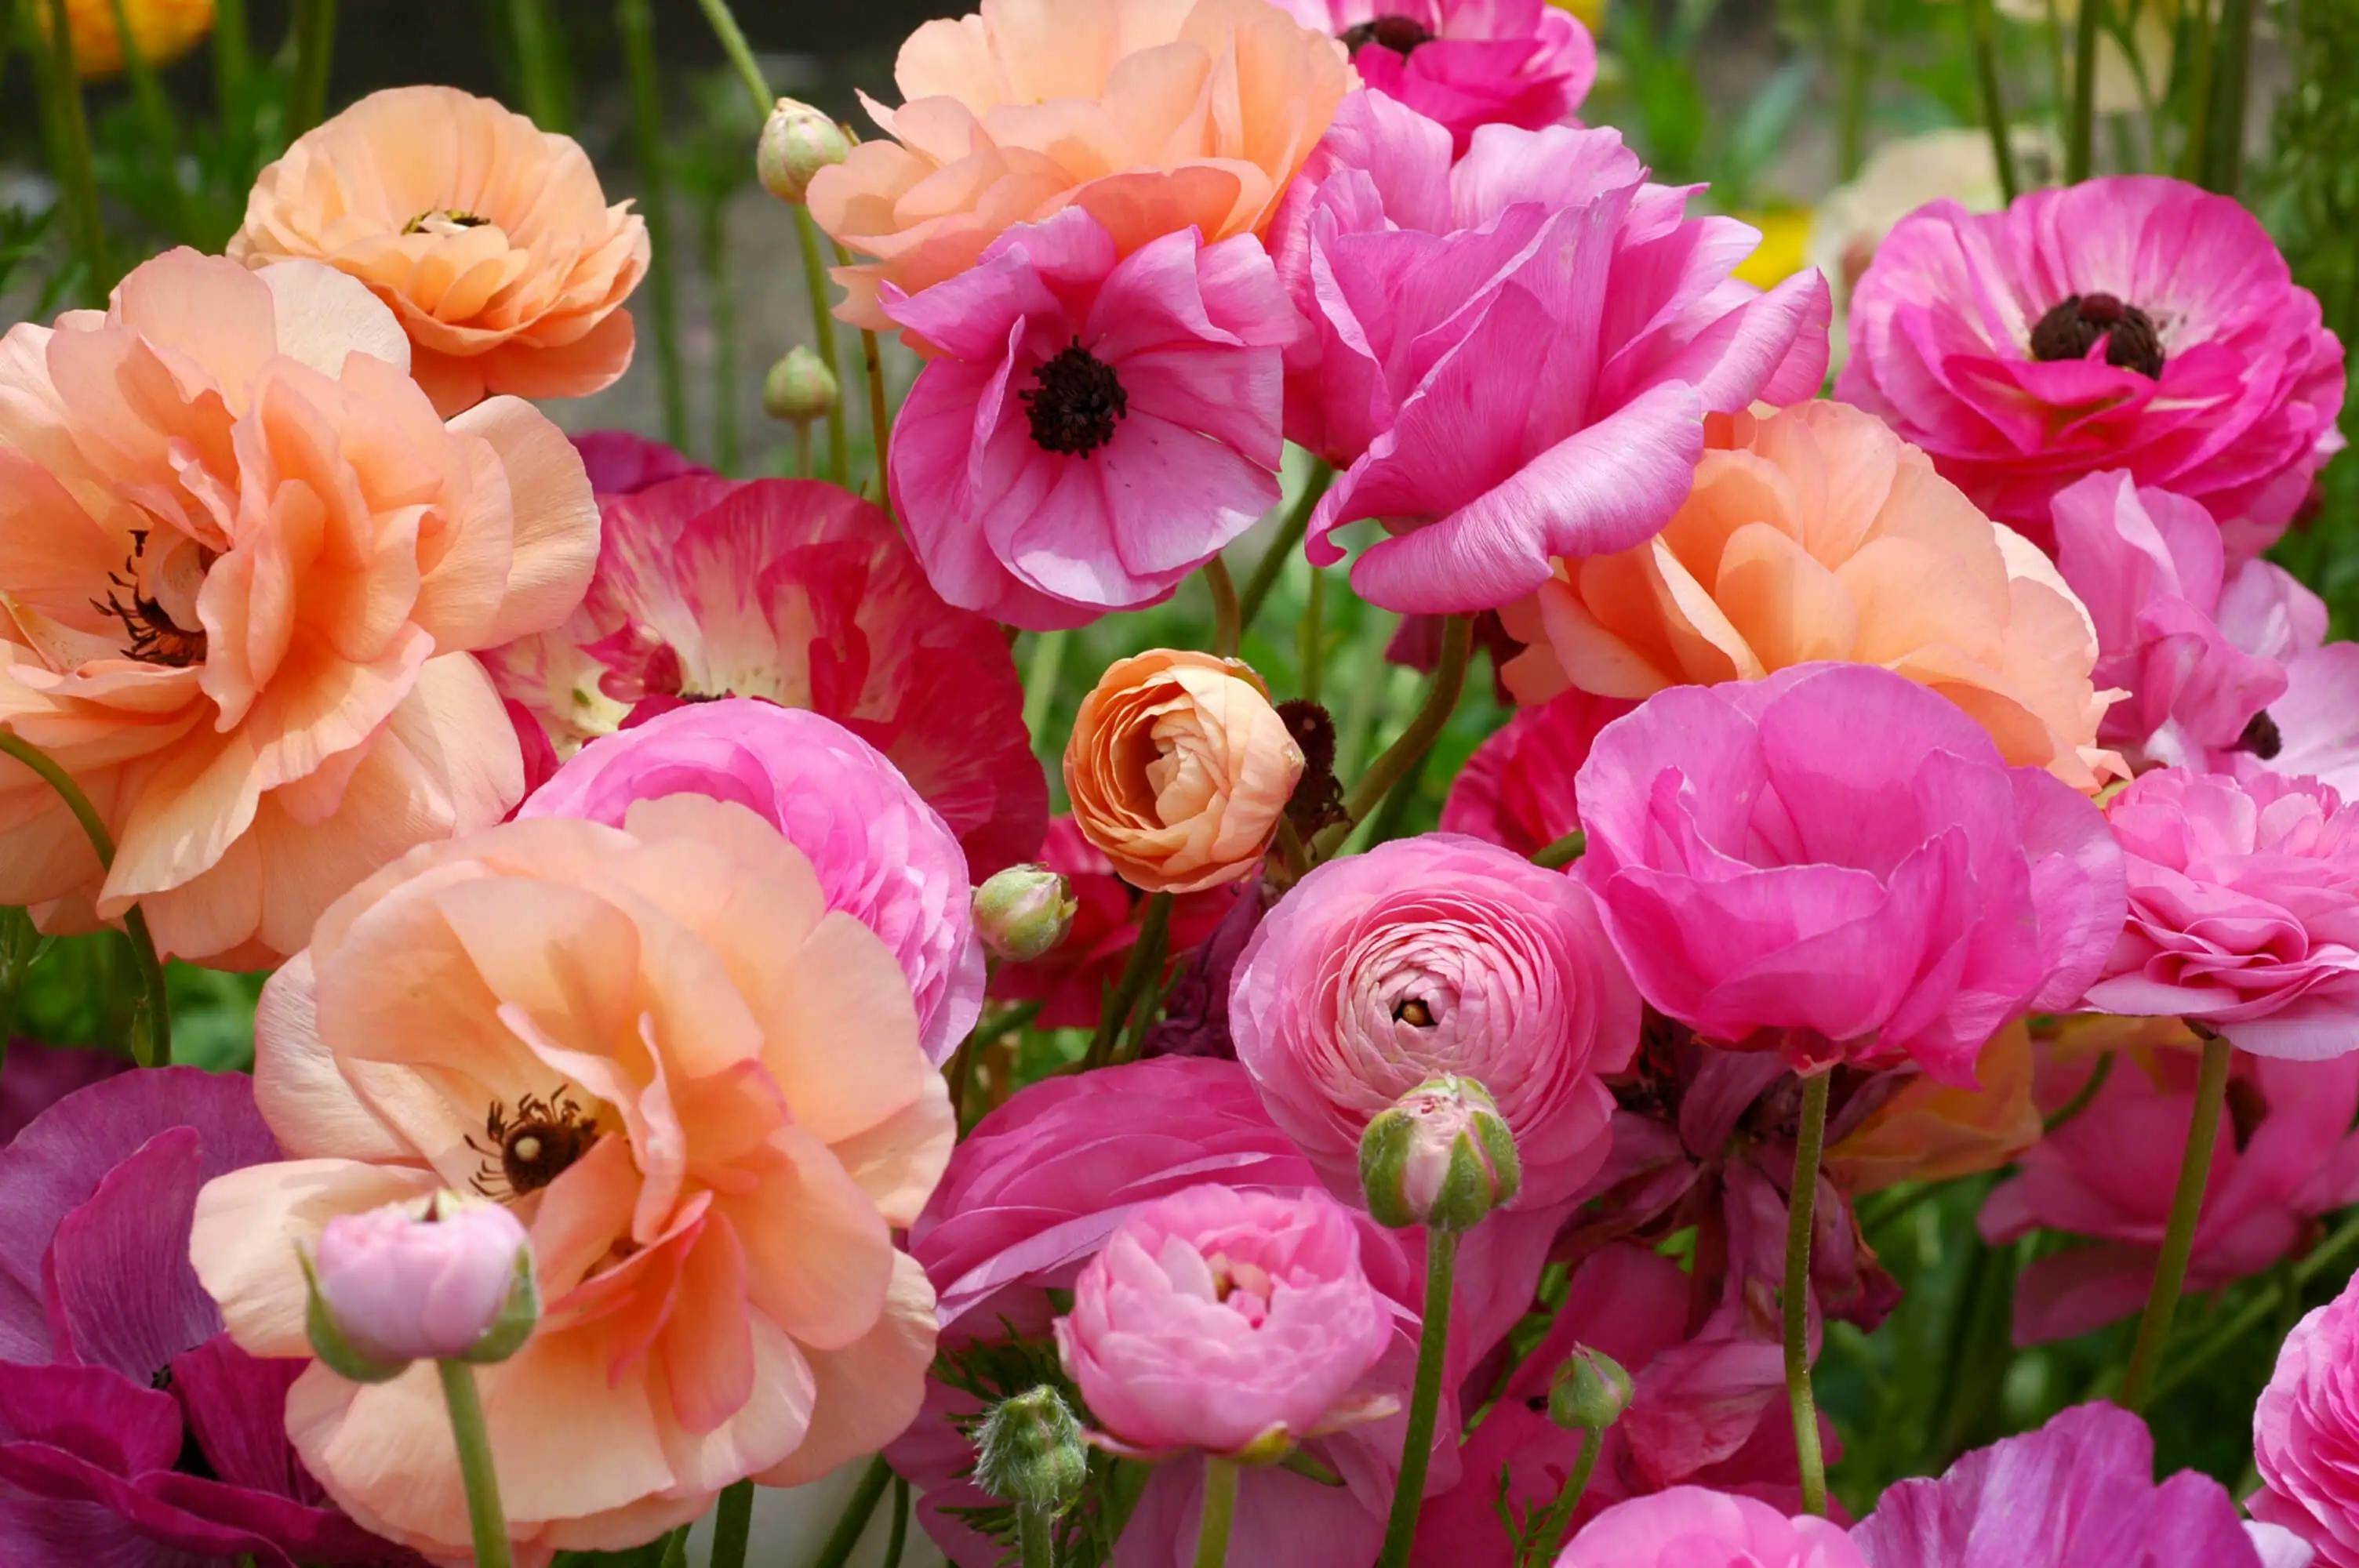 Bouquet of ranunculus bulbs with pink and orange blooms.